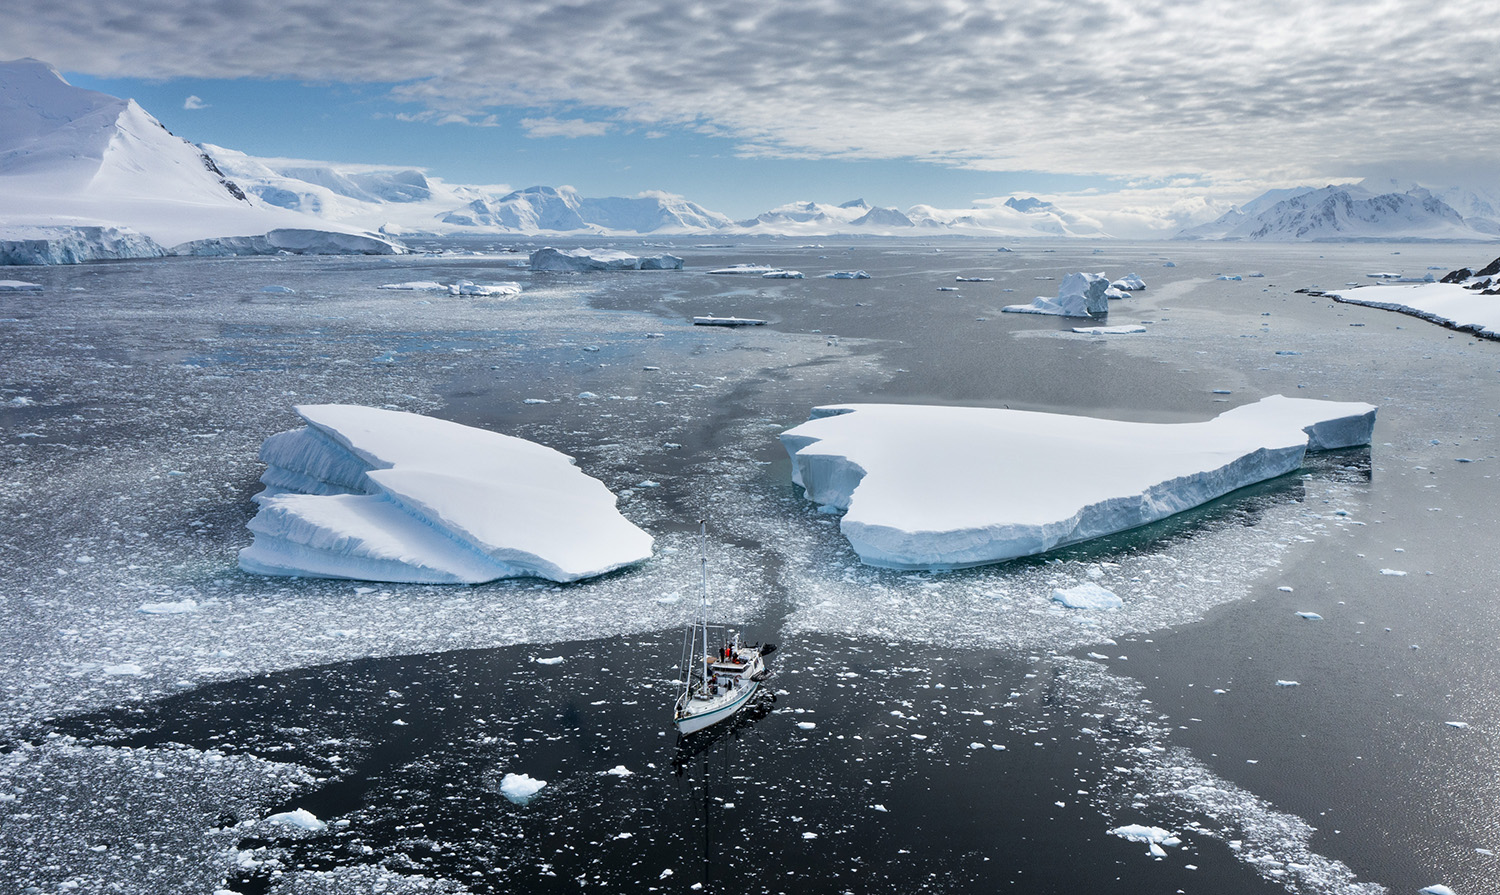 Aerial shot of Australis sailing between two large ice sheets.